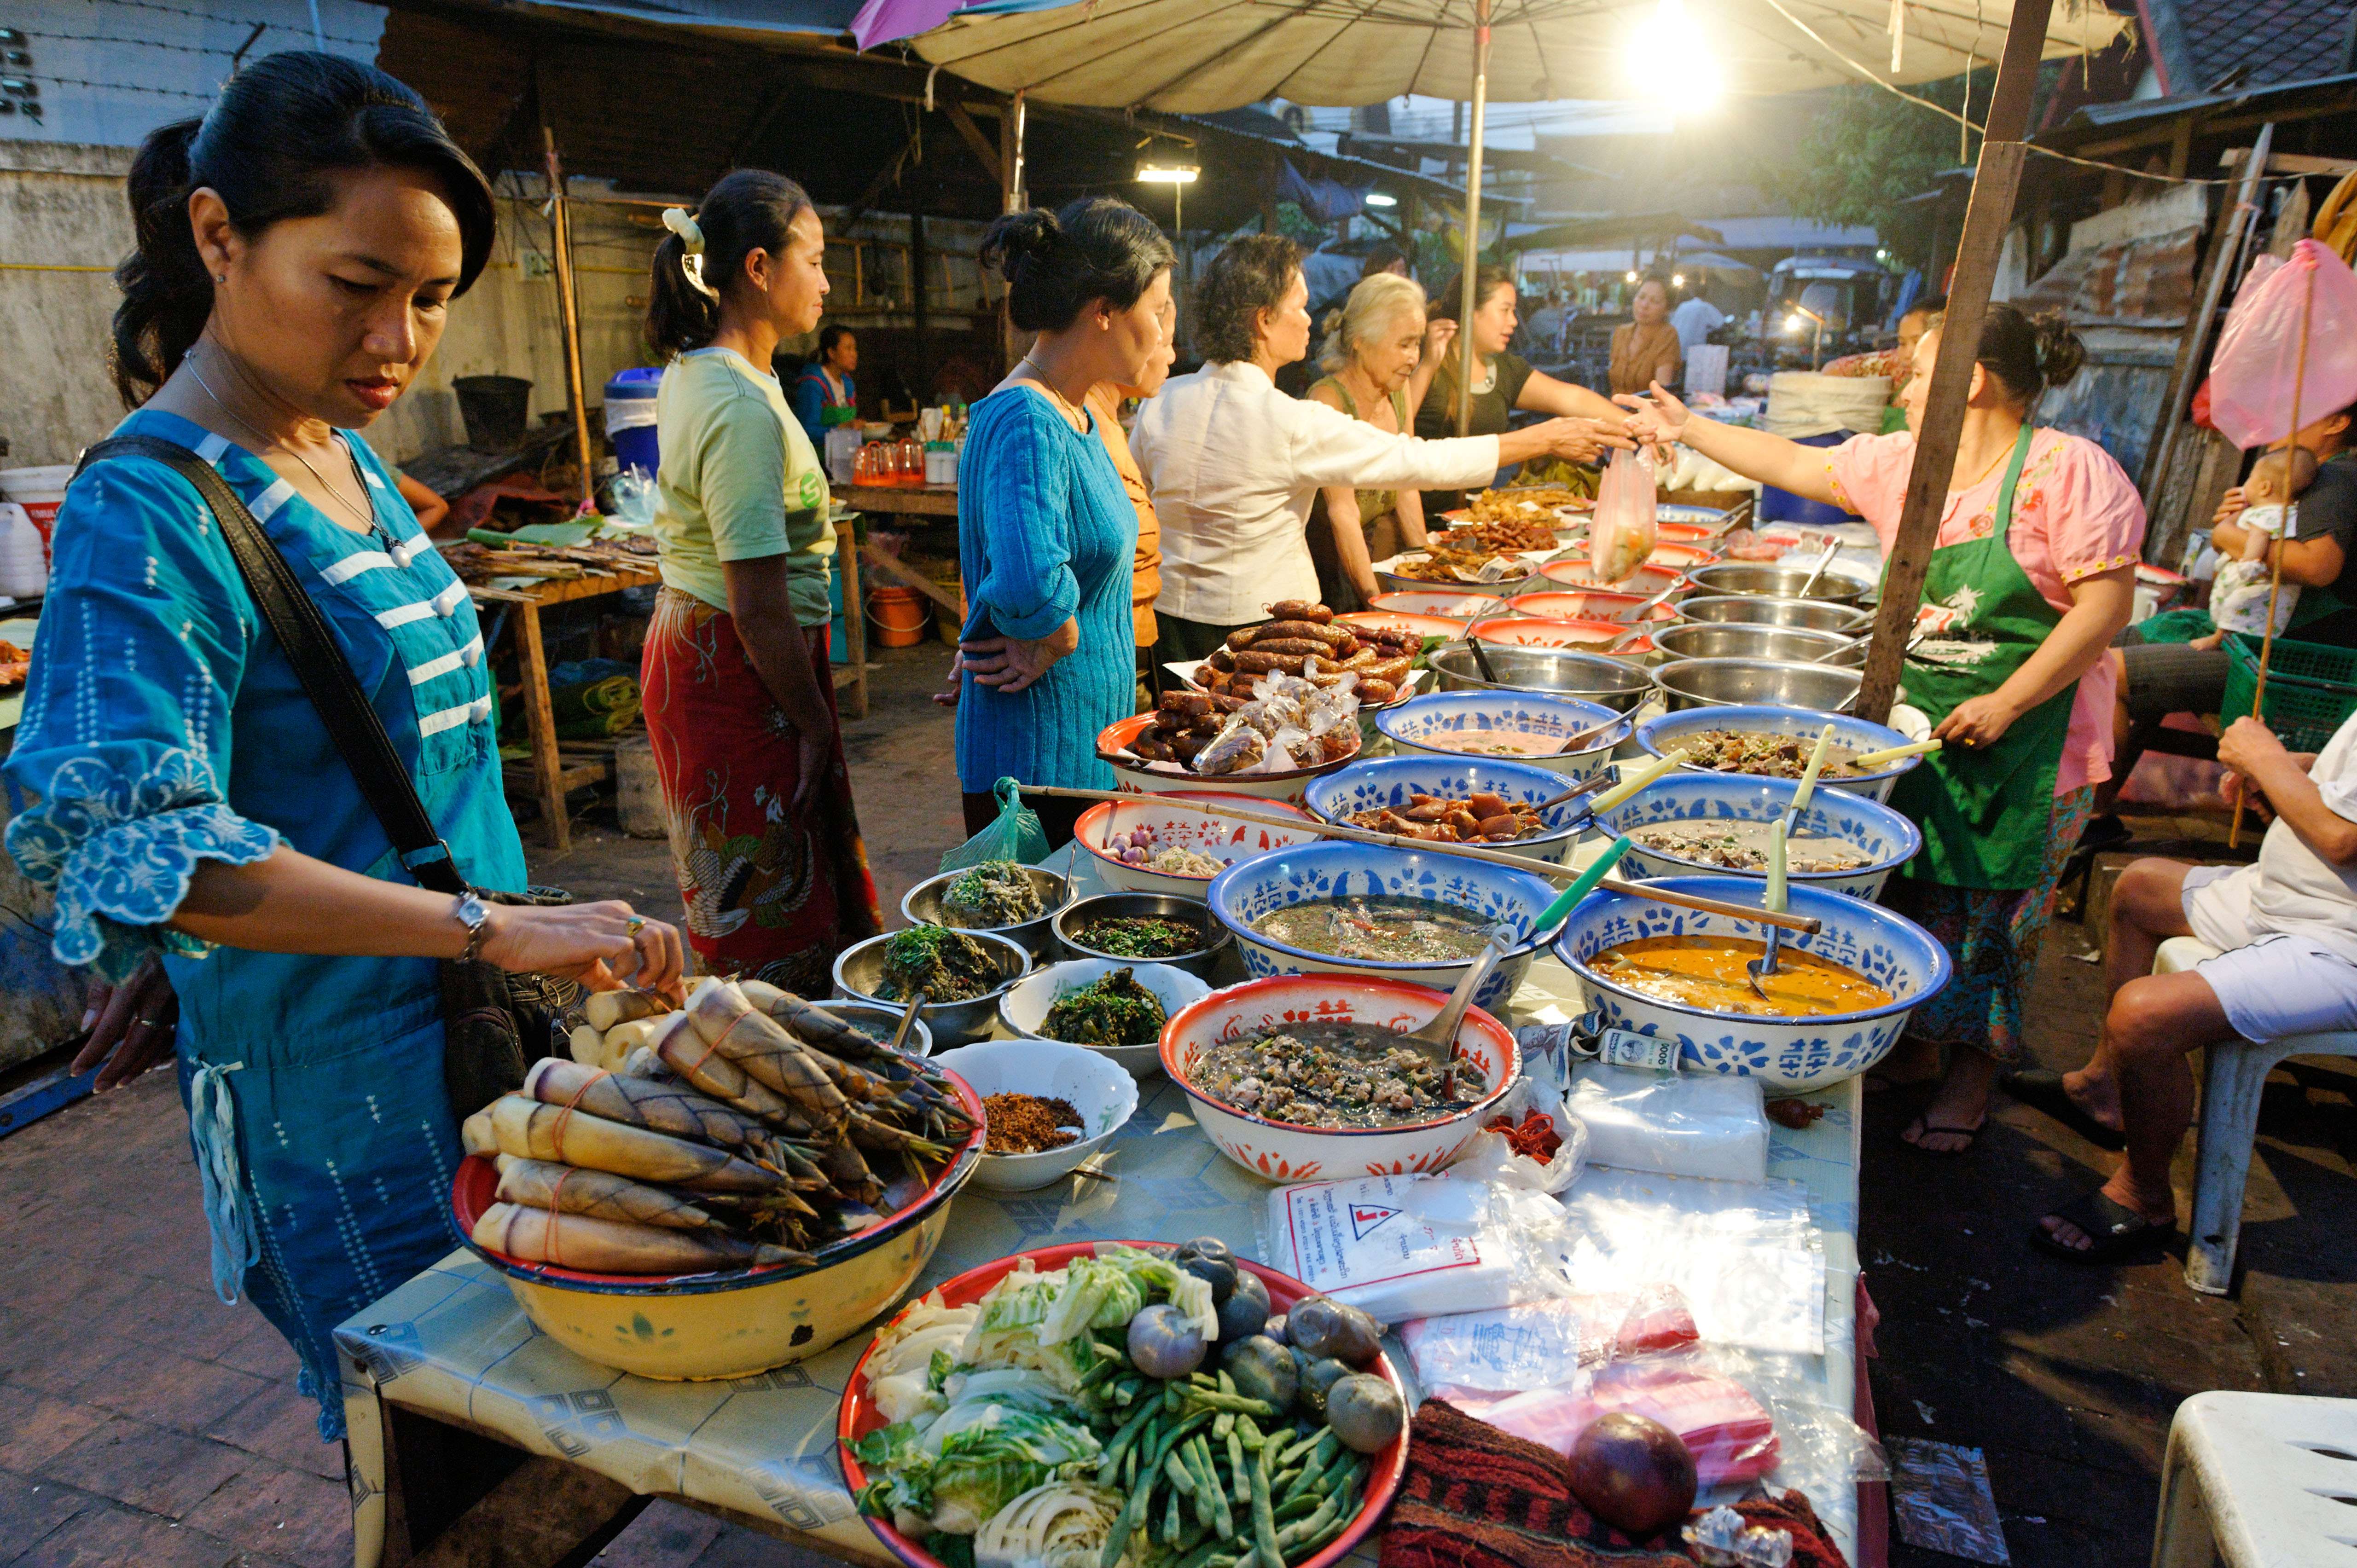 She taught Americans to respect Lao food. Now she's trying to teach Laos, too